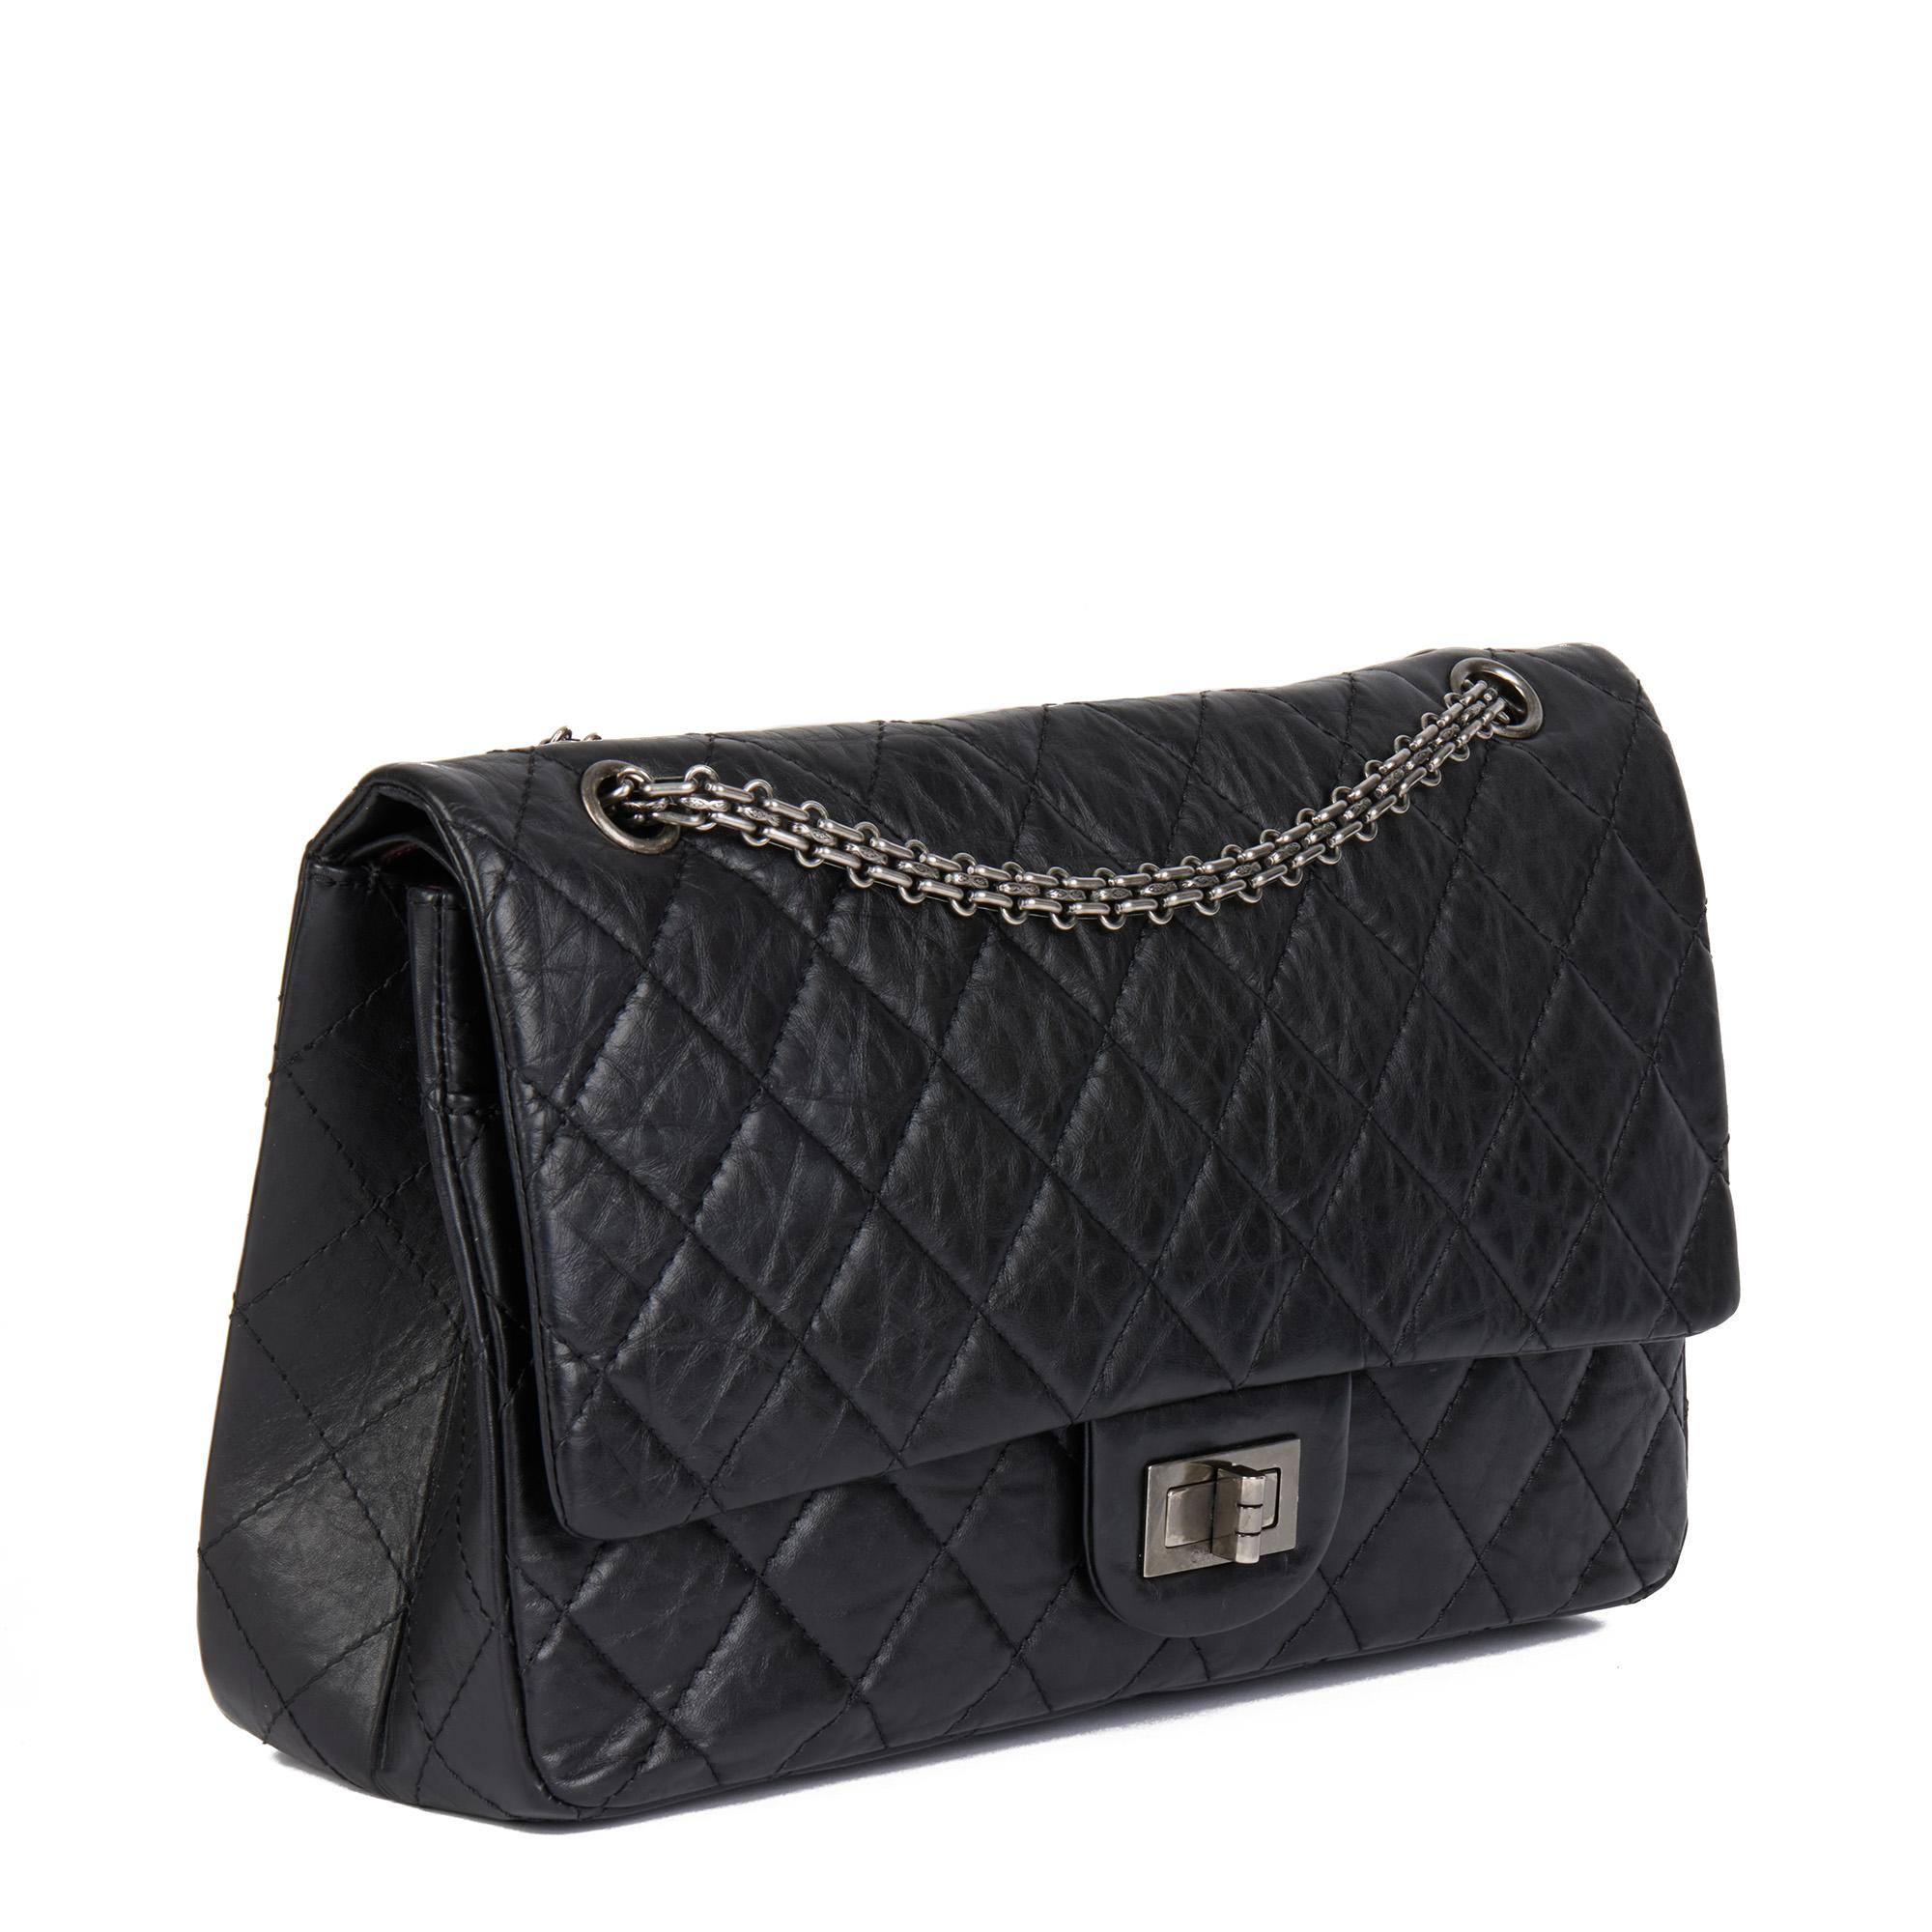 CHANEL
Black Quilted Aged Calfskin leather 2.55 Reissue 227 Double Flap Bag

Xupes Reference: CB608
Serial Number: 14293978
Age (Circa): 2011
Accompanied By: Chanel Dust Bag, Authenticity Card 
Authenticity Details: Serial Sticker (Made in